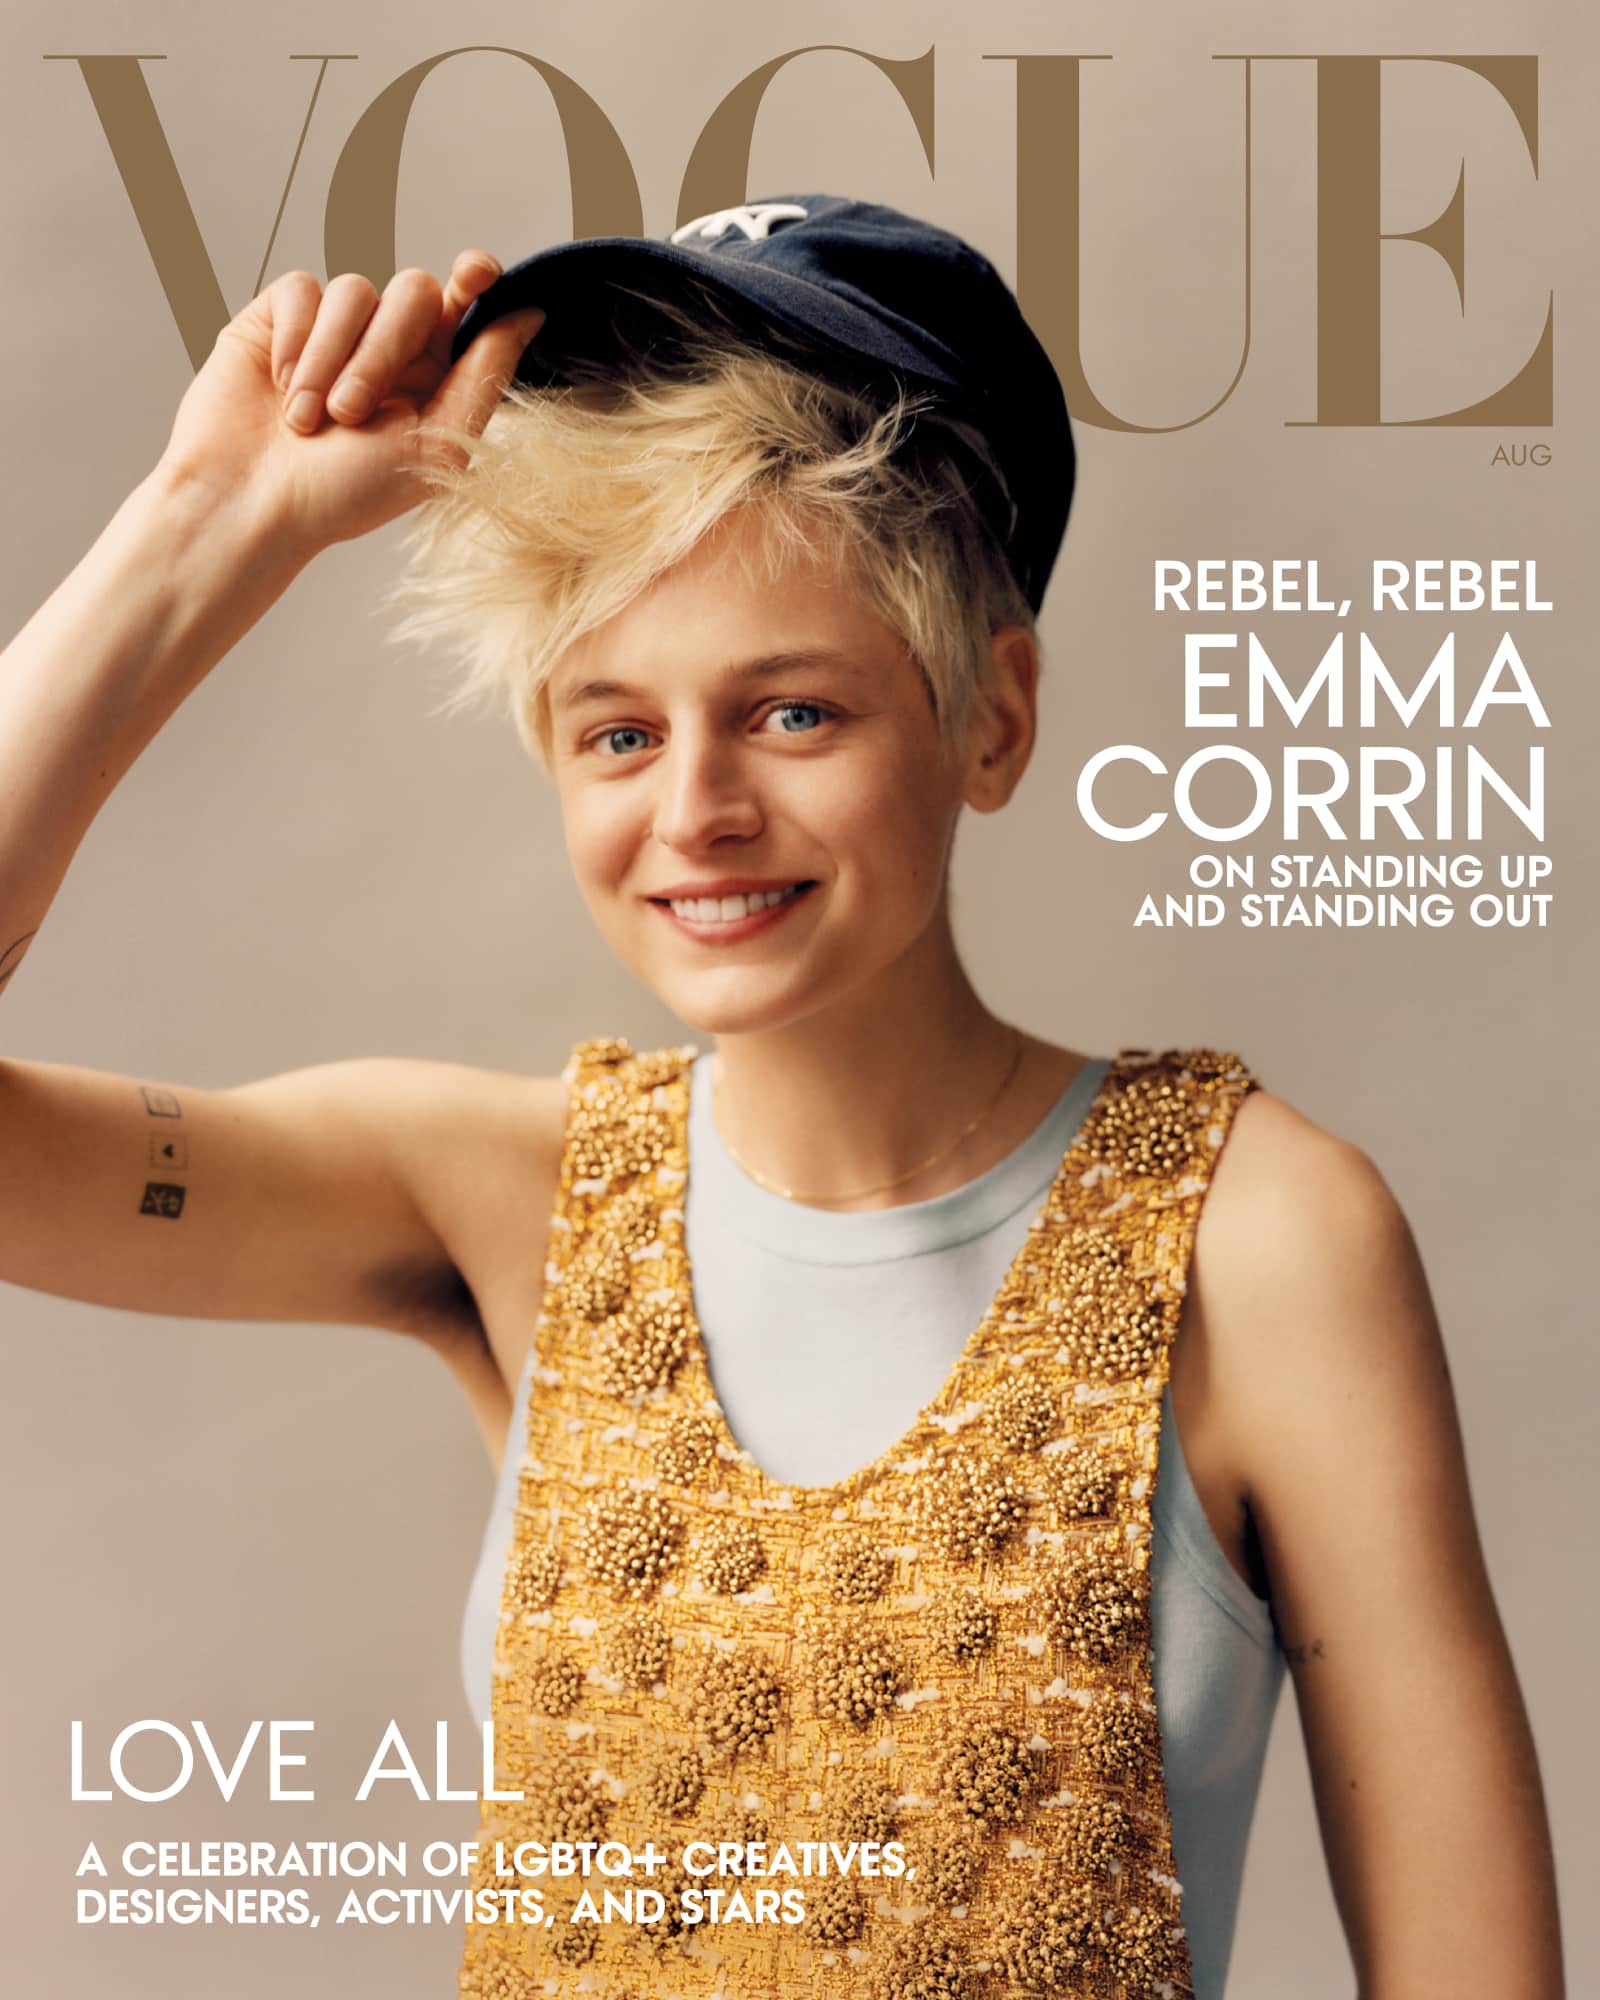 Emma Corrin on the cover of Vogue, August, 2022